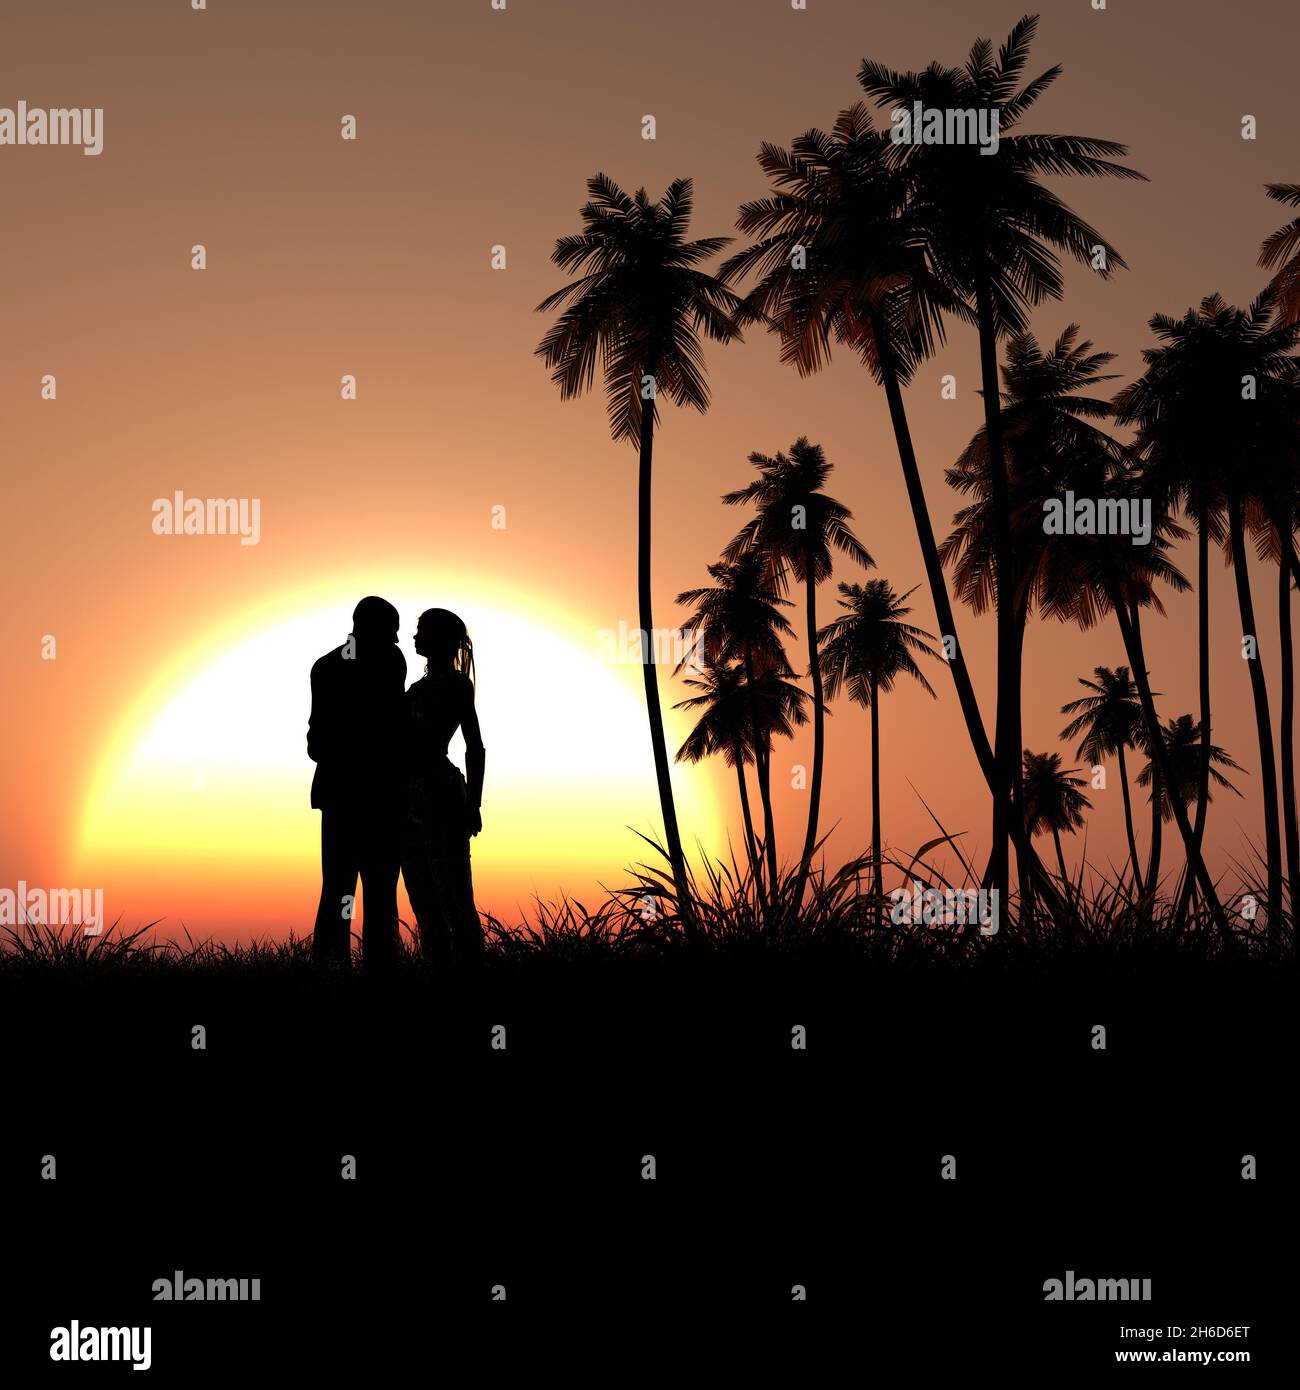 Illustration of a silhouette of palm trees and a couple during the sunsey Stock Photo